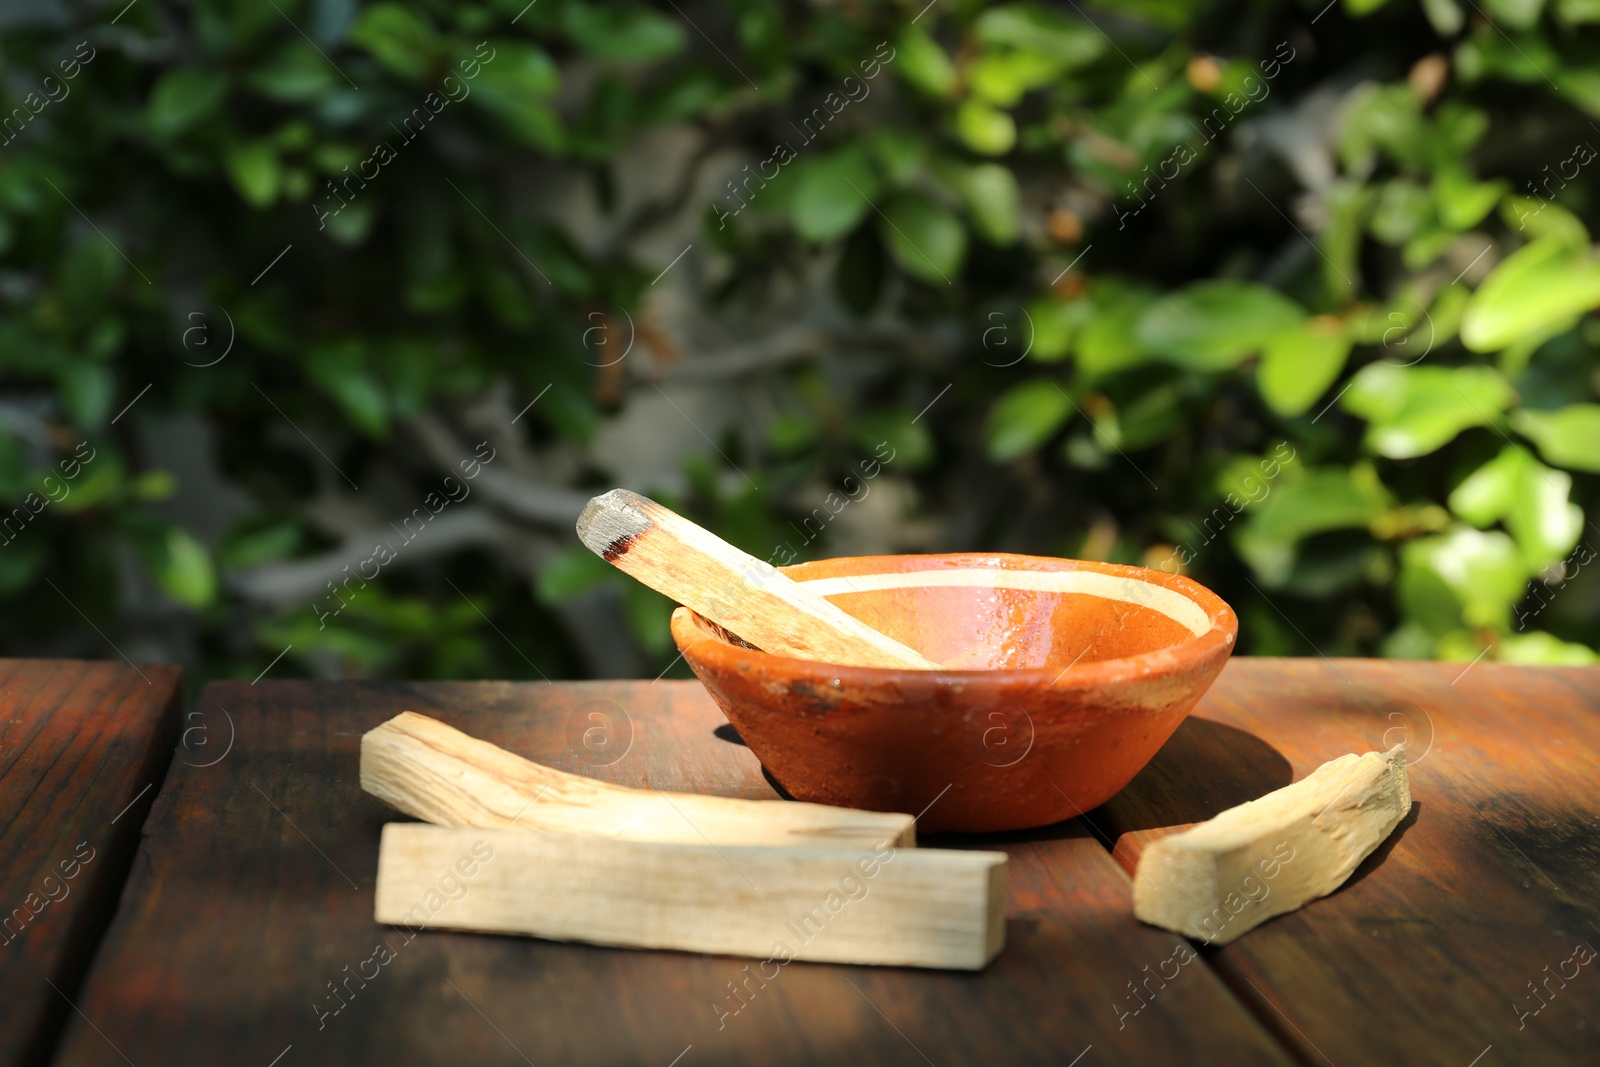 Photo of Palo santo sticks and bowl on wooden table outdoors, space for text